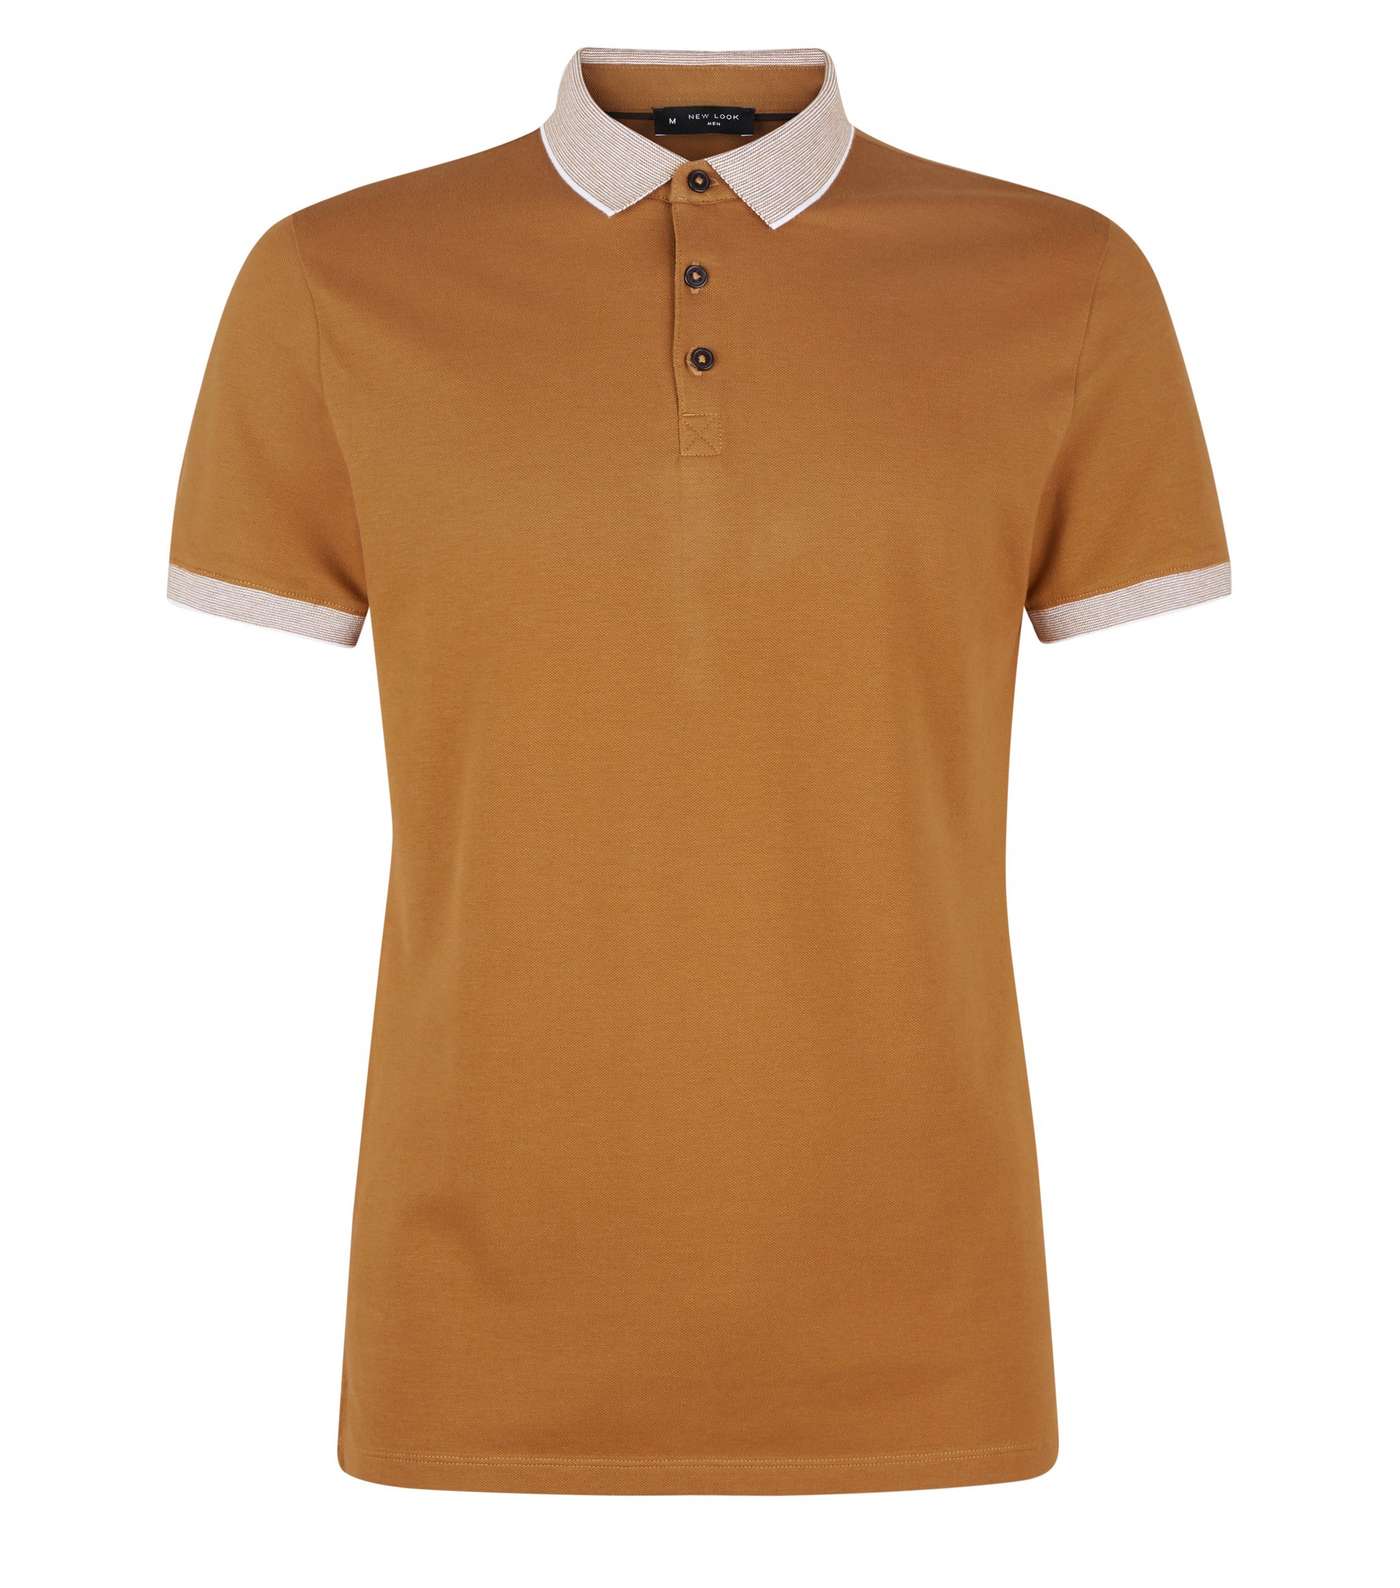 Camel Stripe Collar Muscle Fit Polo Shirt Image 4